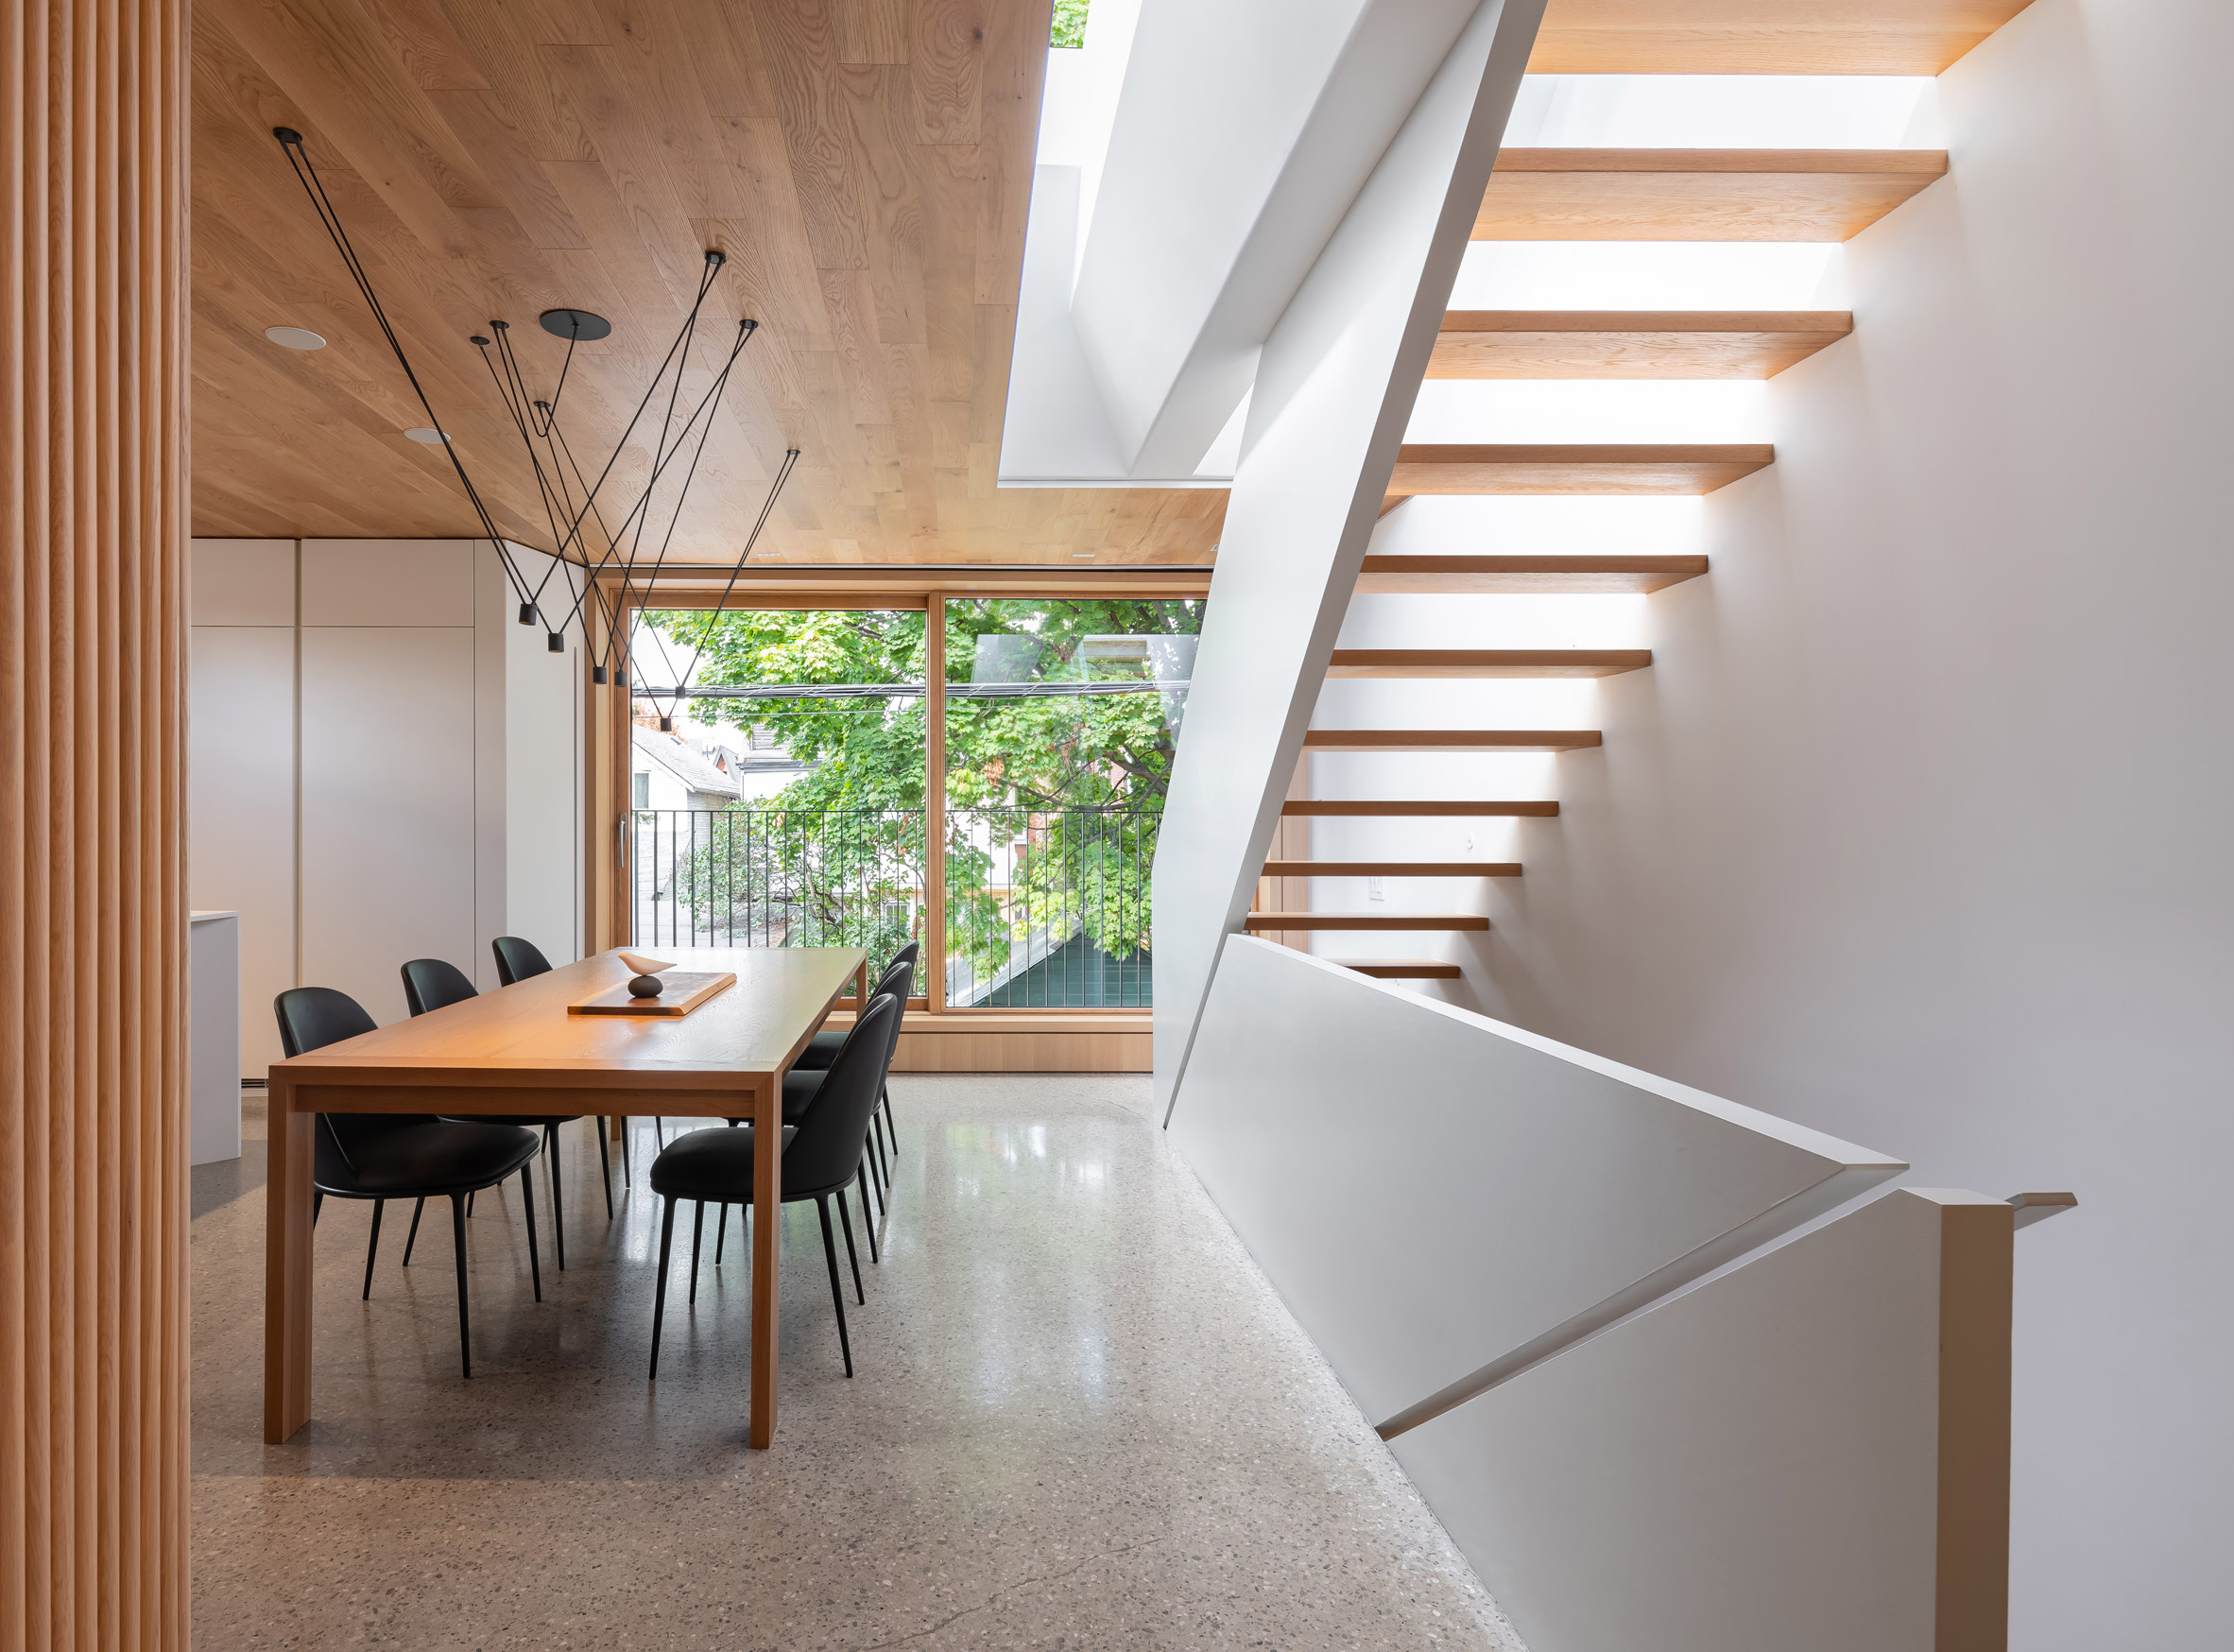 Staircase within The Garden Laneway House